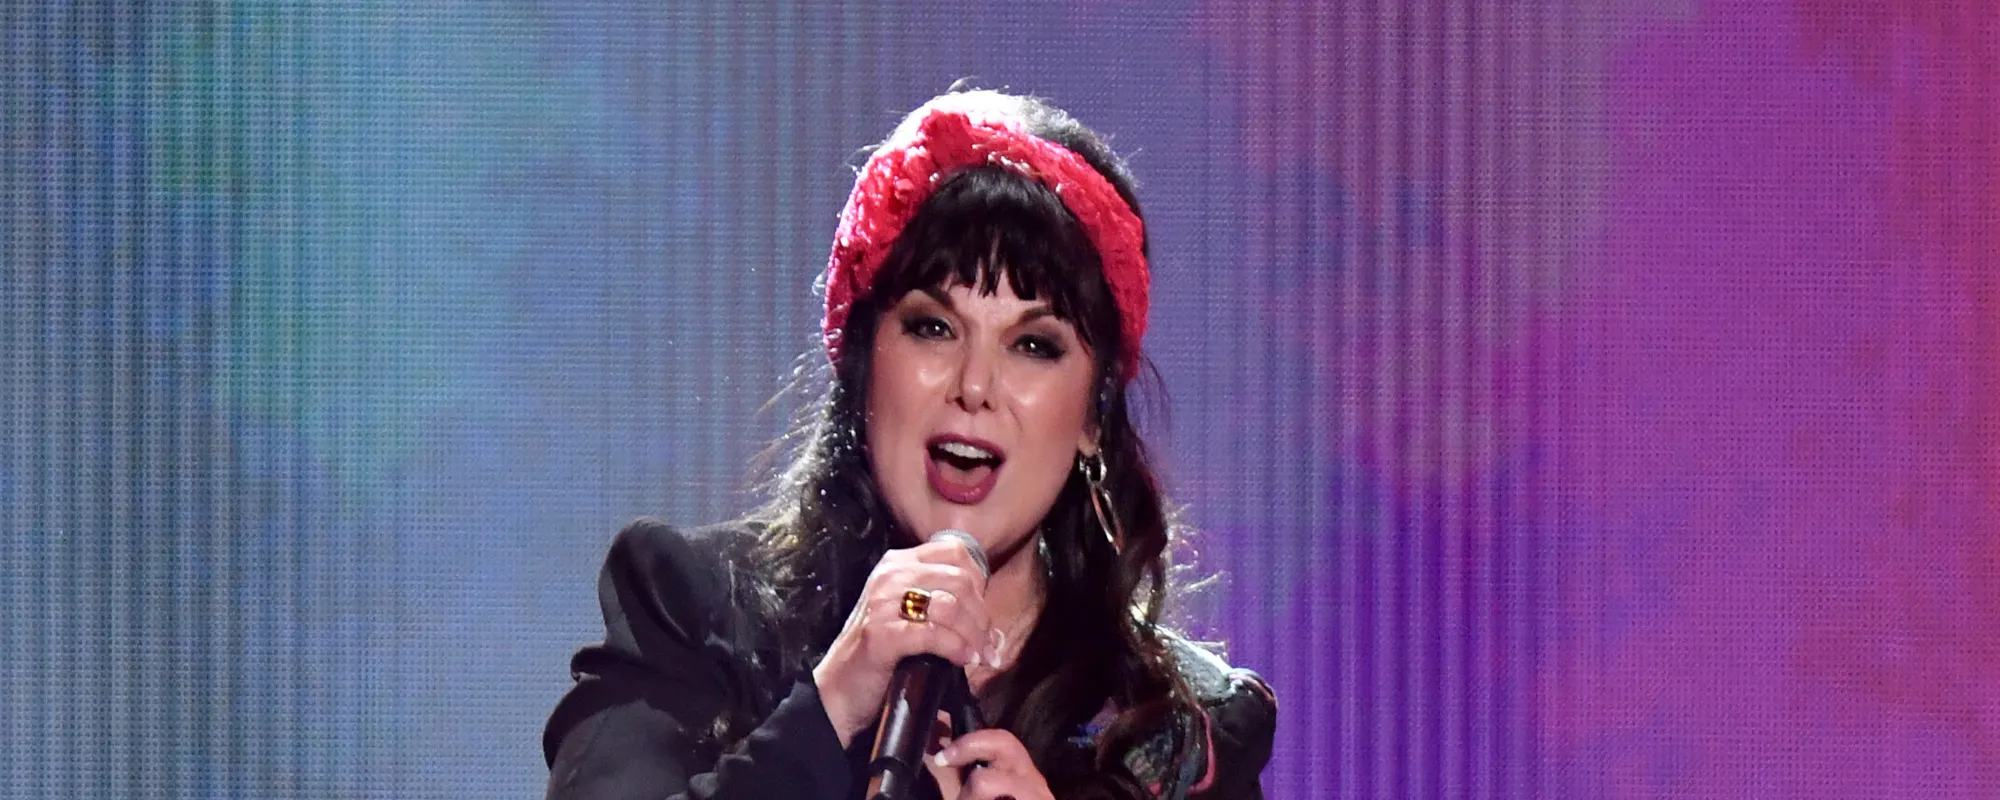 Ann Wilson Hints at Big News for Heart Fans, Says They Have a Reason to ‘Feel Optimistic’